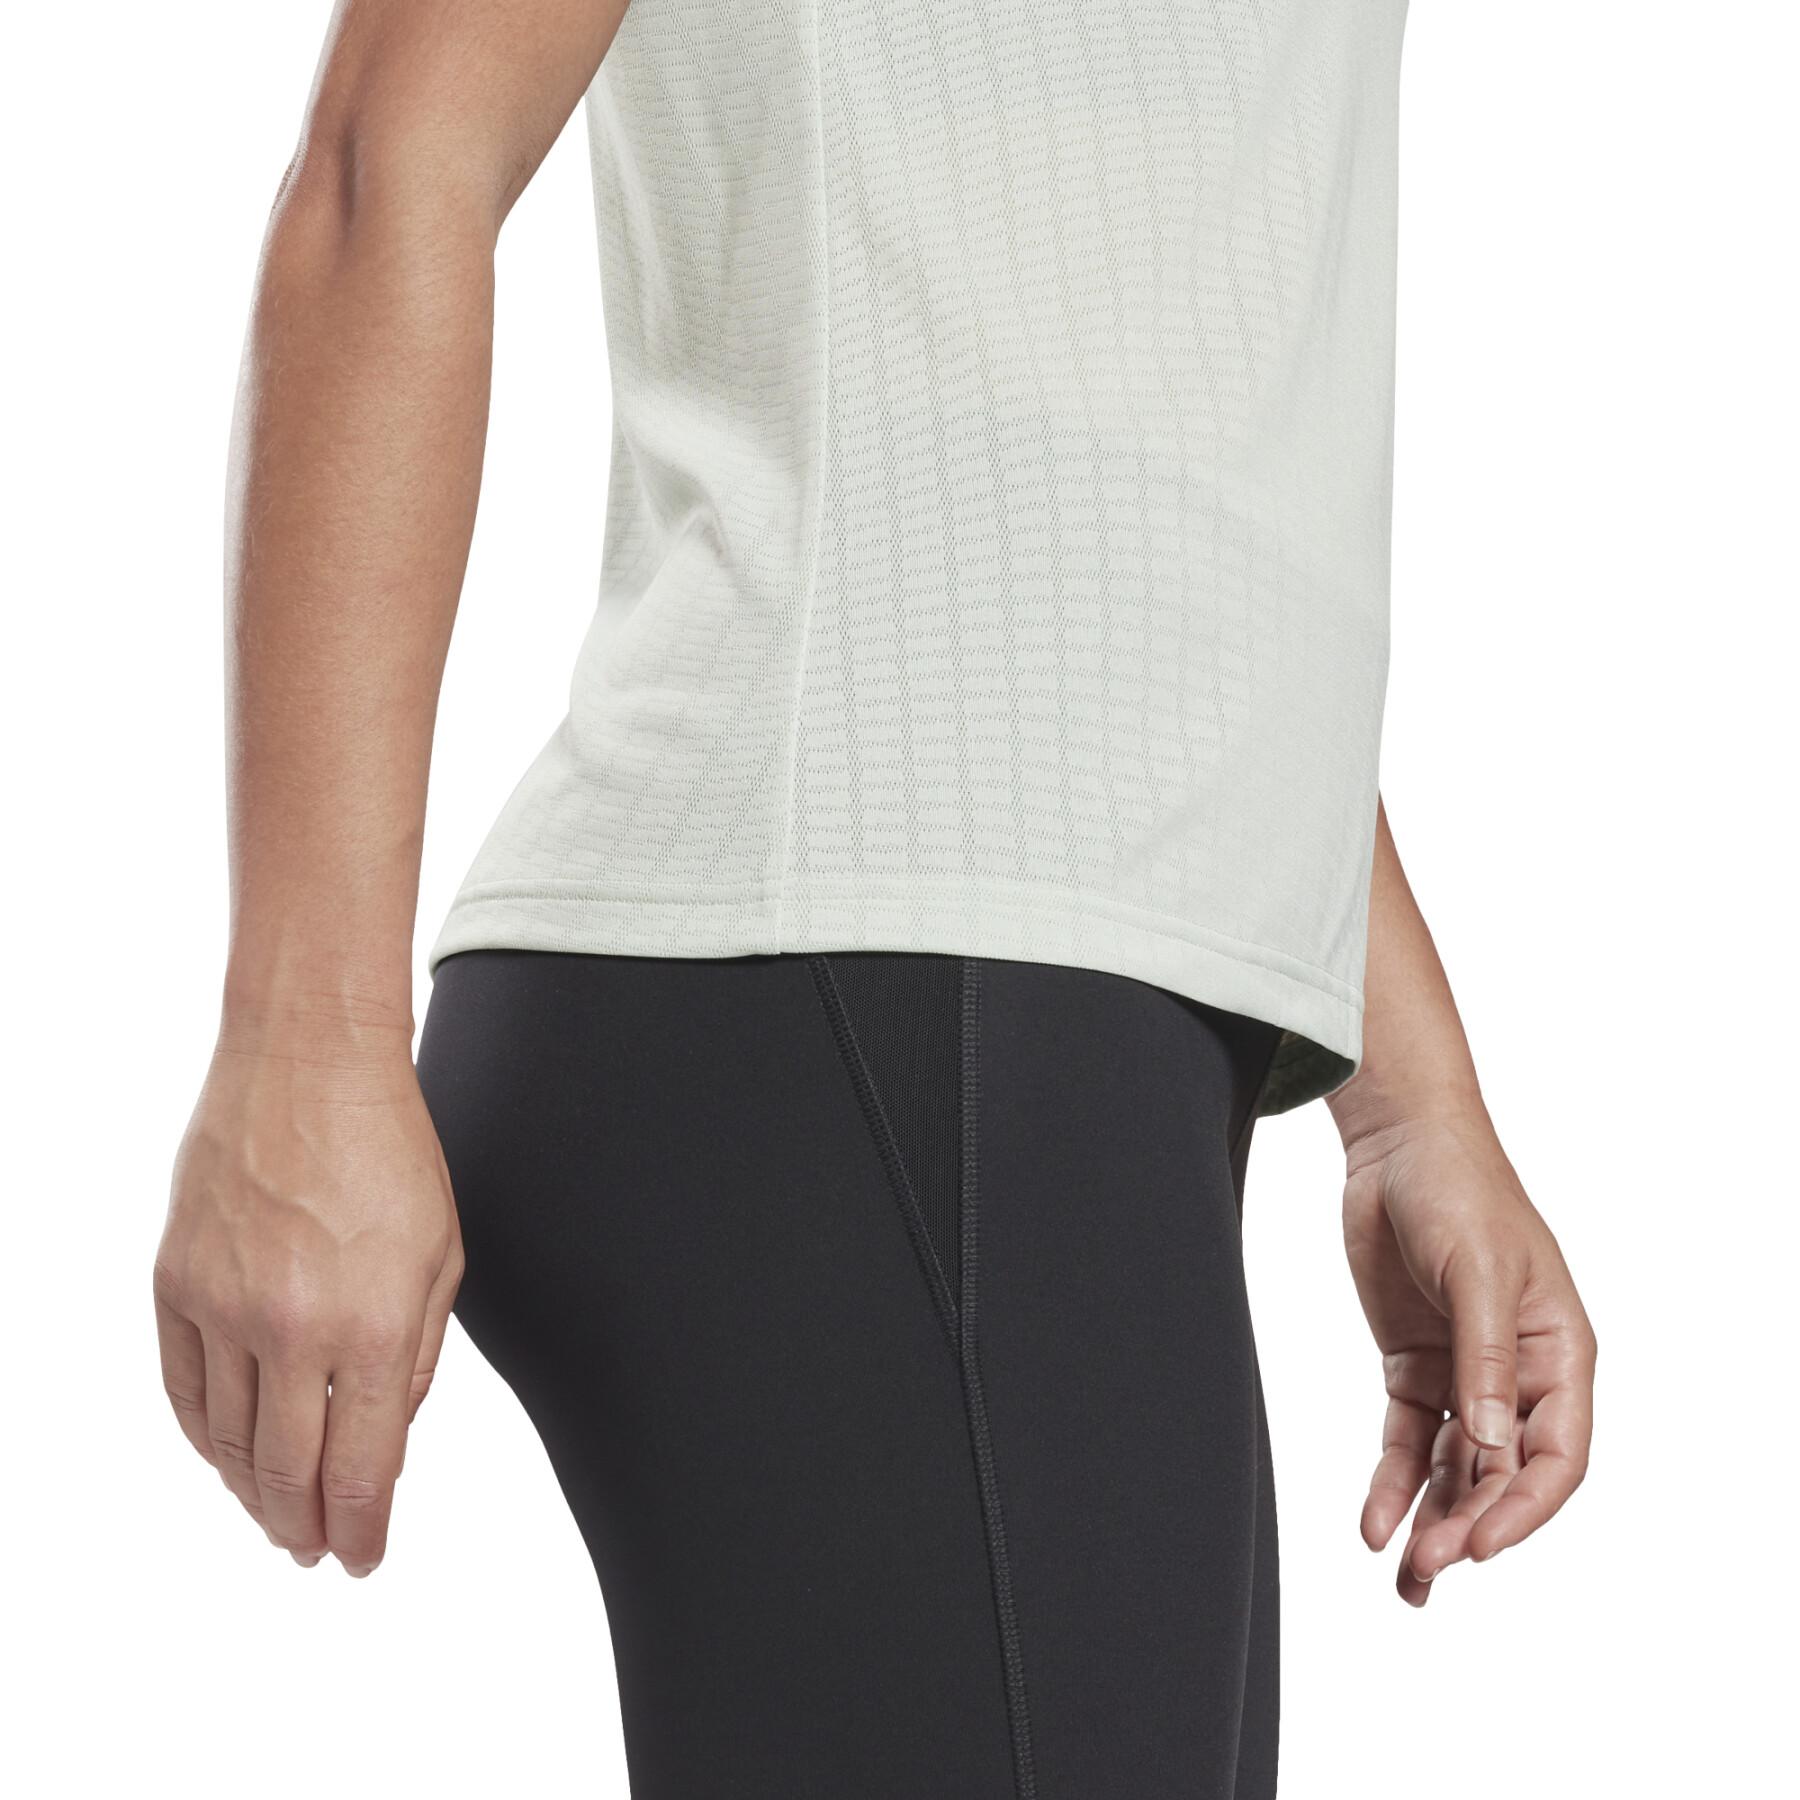 Perforated tank top Reebok United By Fitness